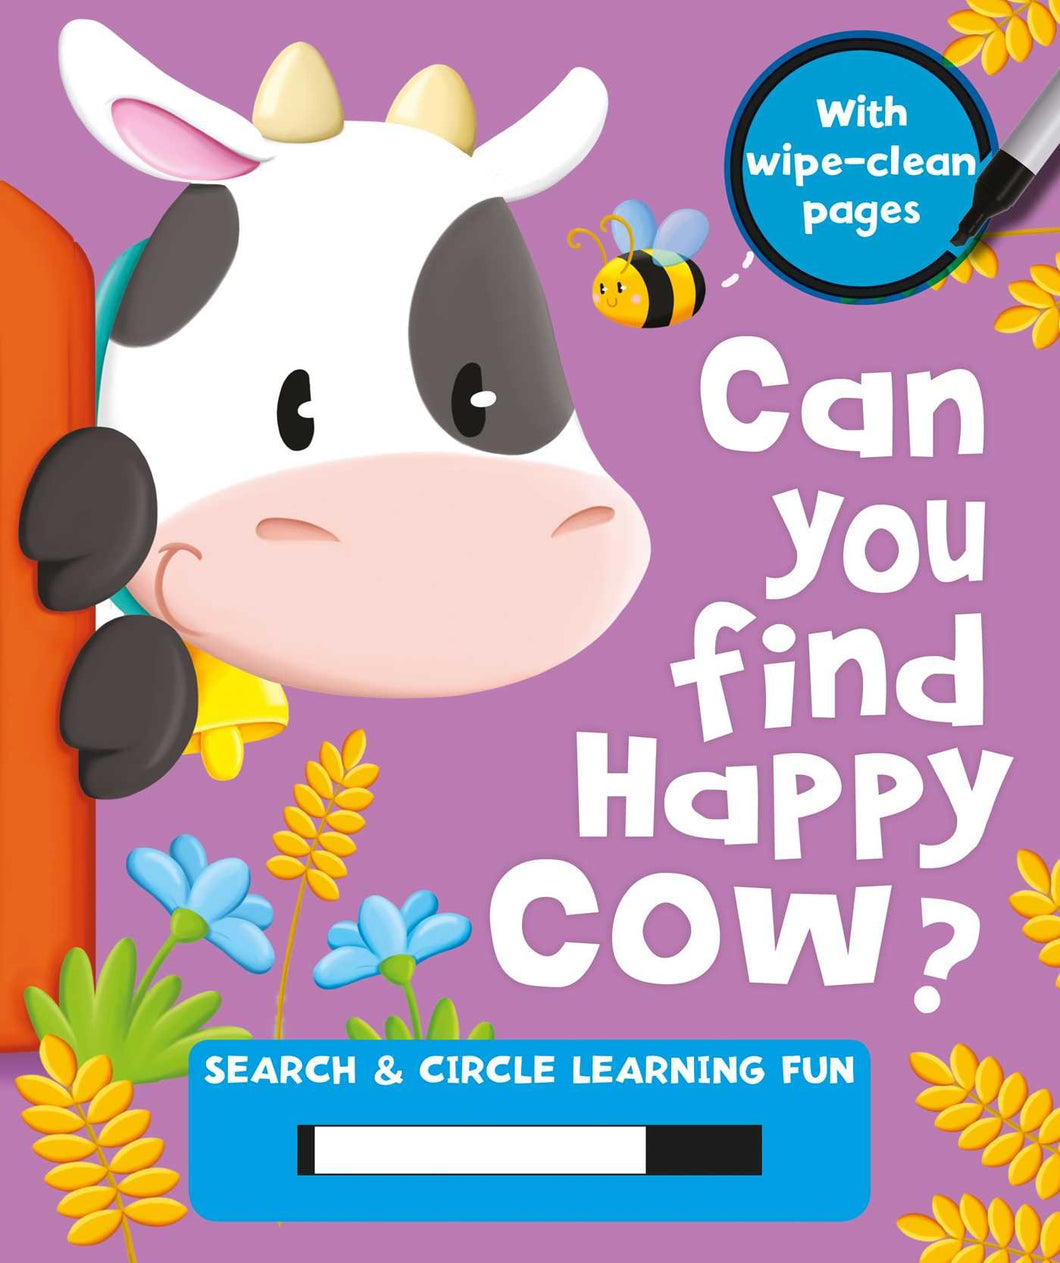 Can You Find Happy Cow?